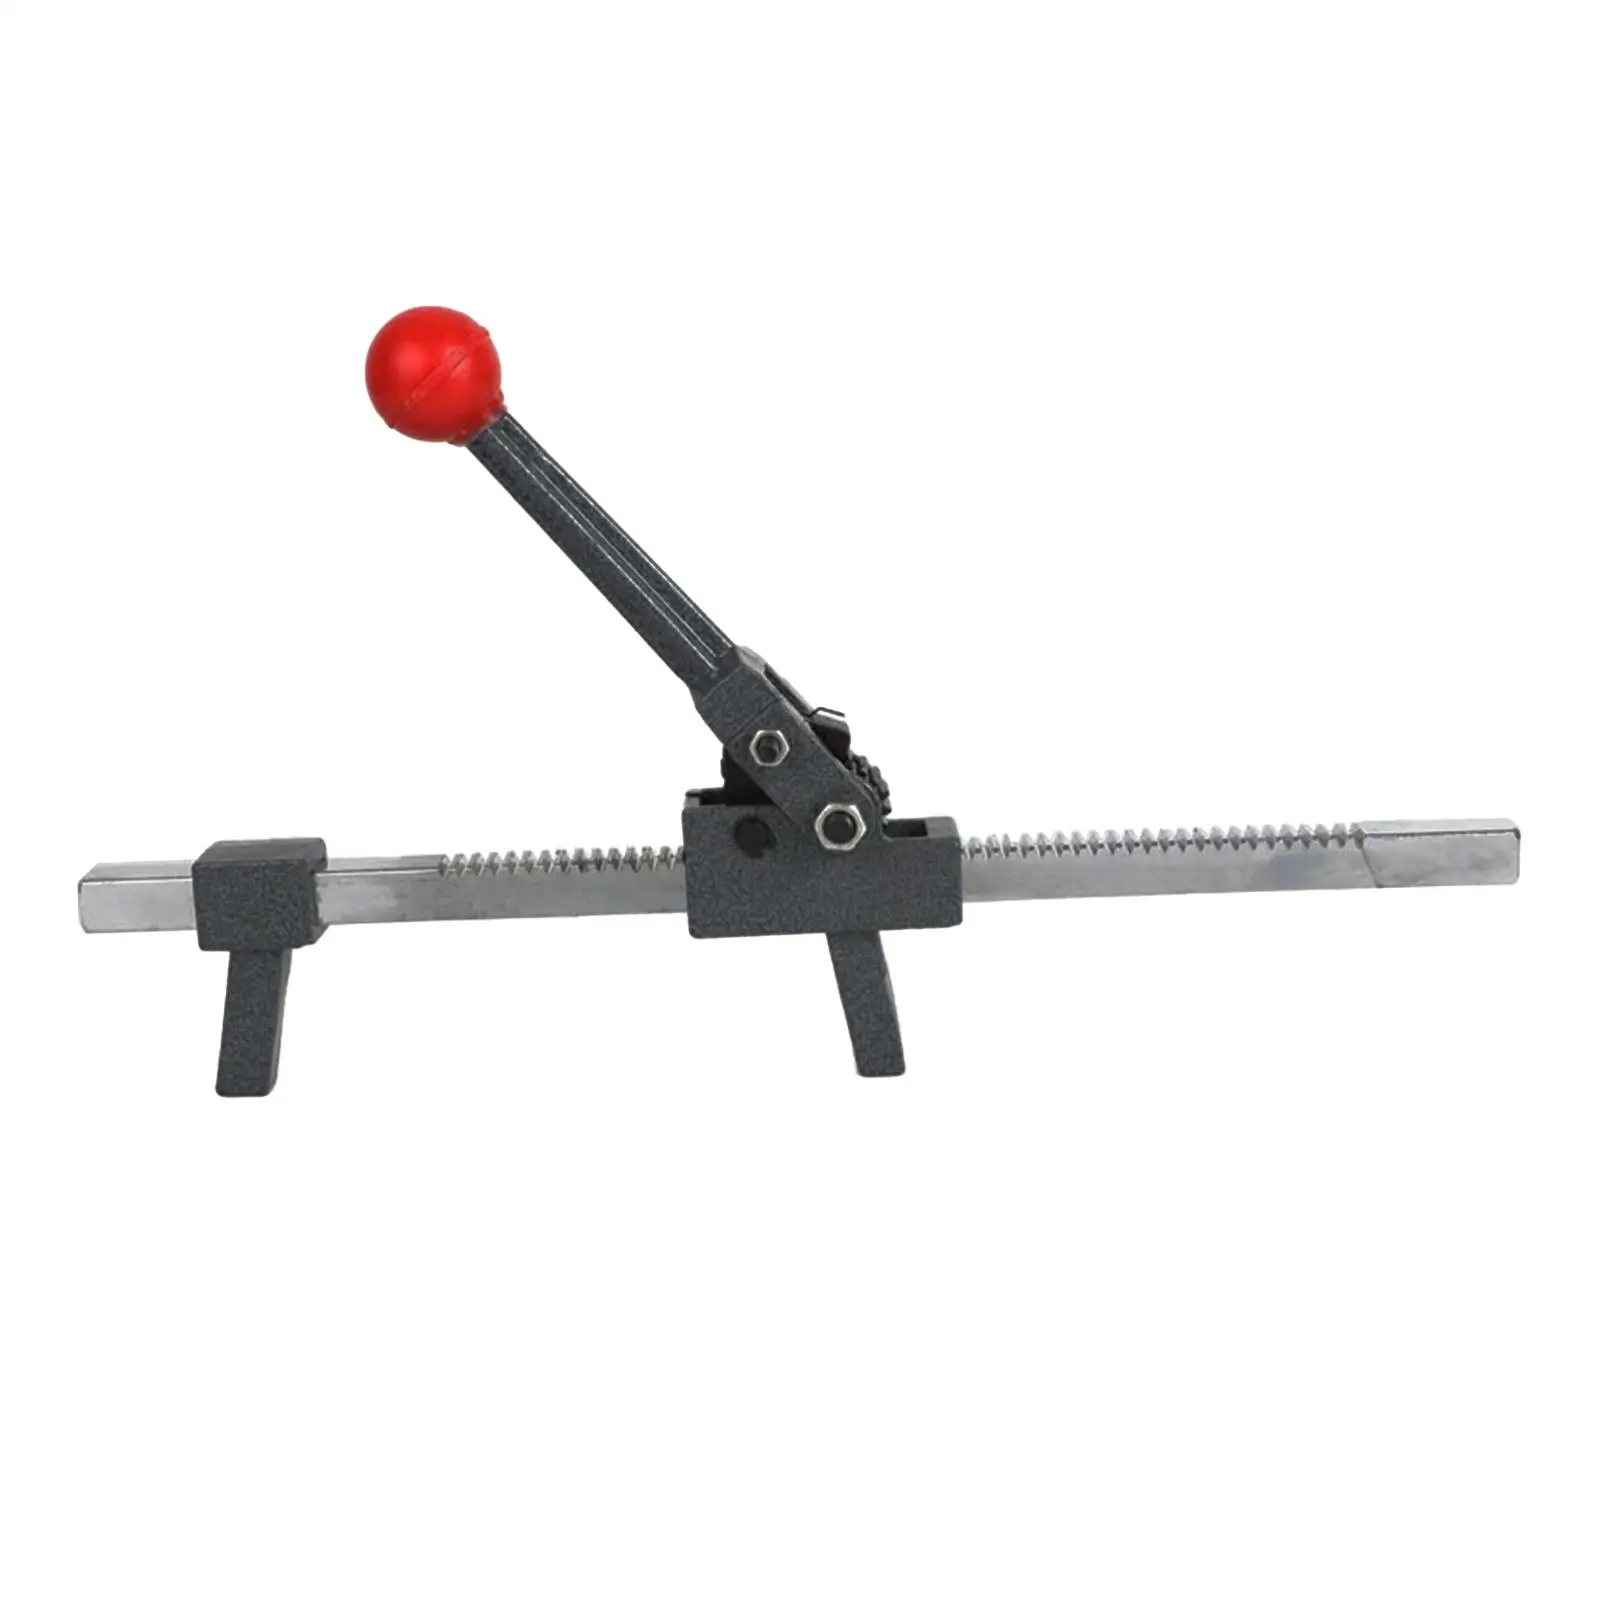 Manual Tire Changer High Performance Premium Car Accessories Mounting Tool